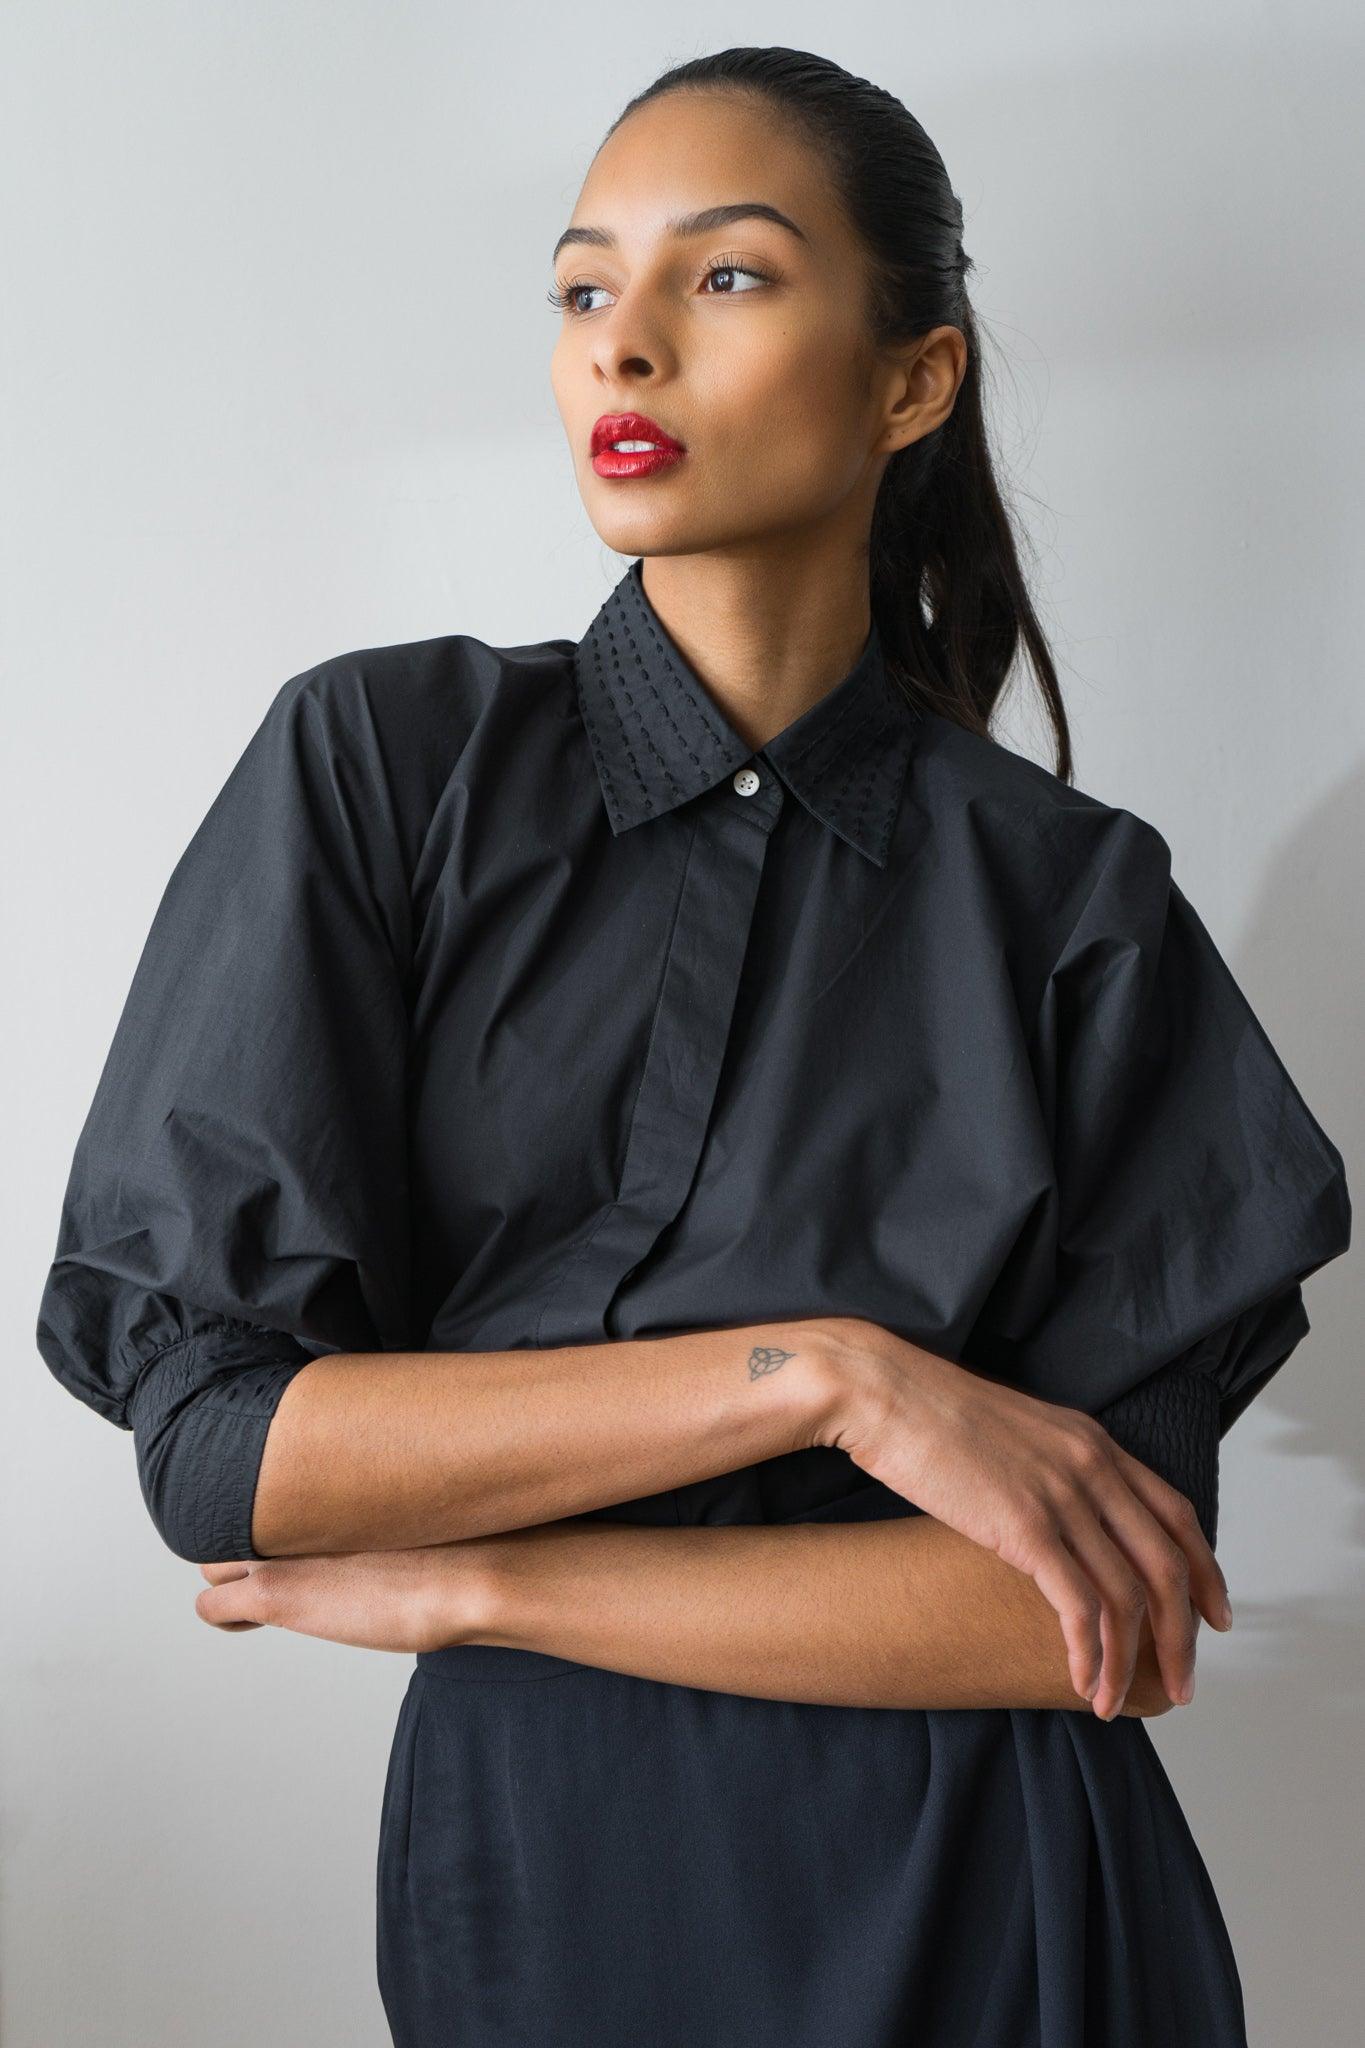 MARIE "EVERYDAY COUTURE SHIRT" MODEL 11 - BLACK - Room 502